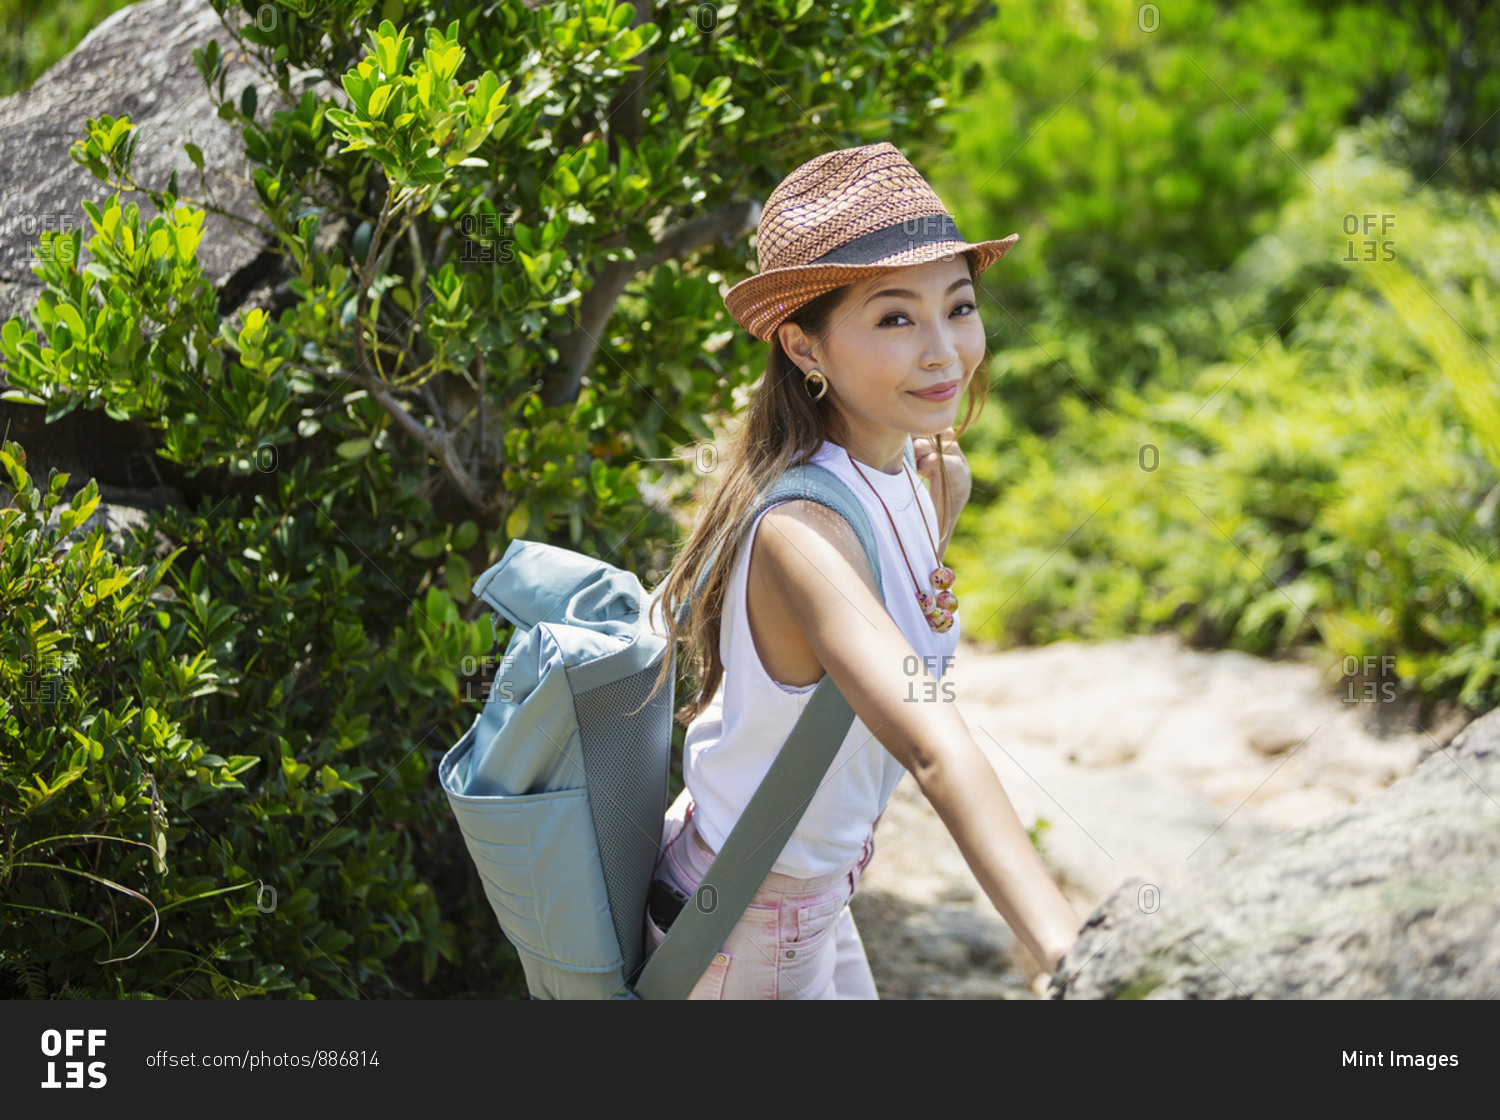 Japanese woman wearing hat and carrying backpack on a hike.